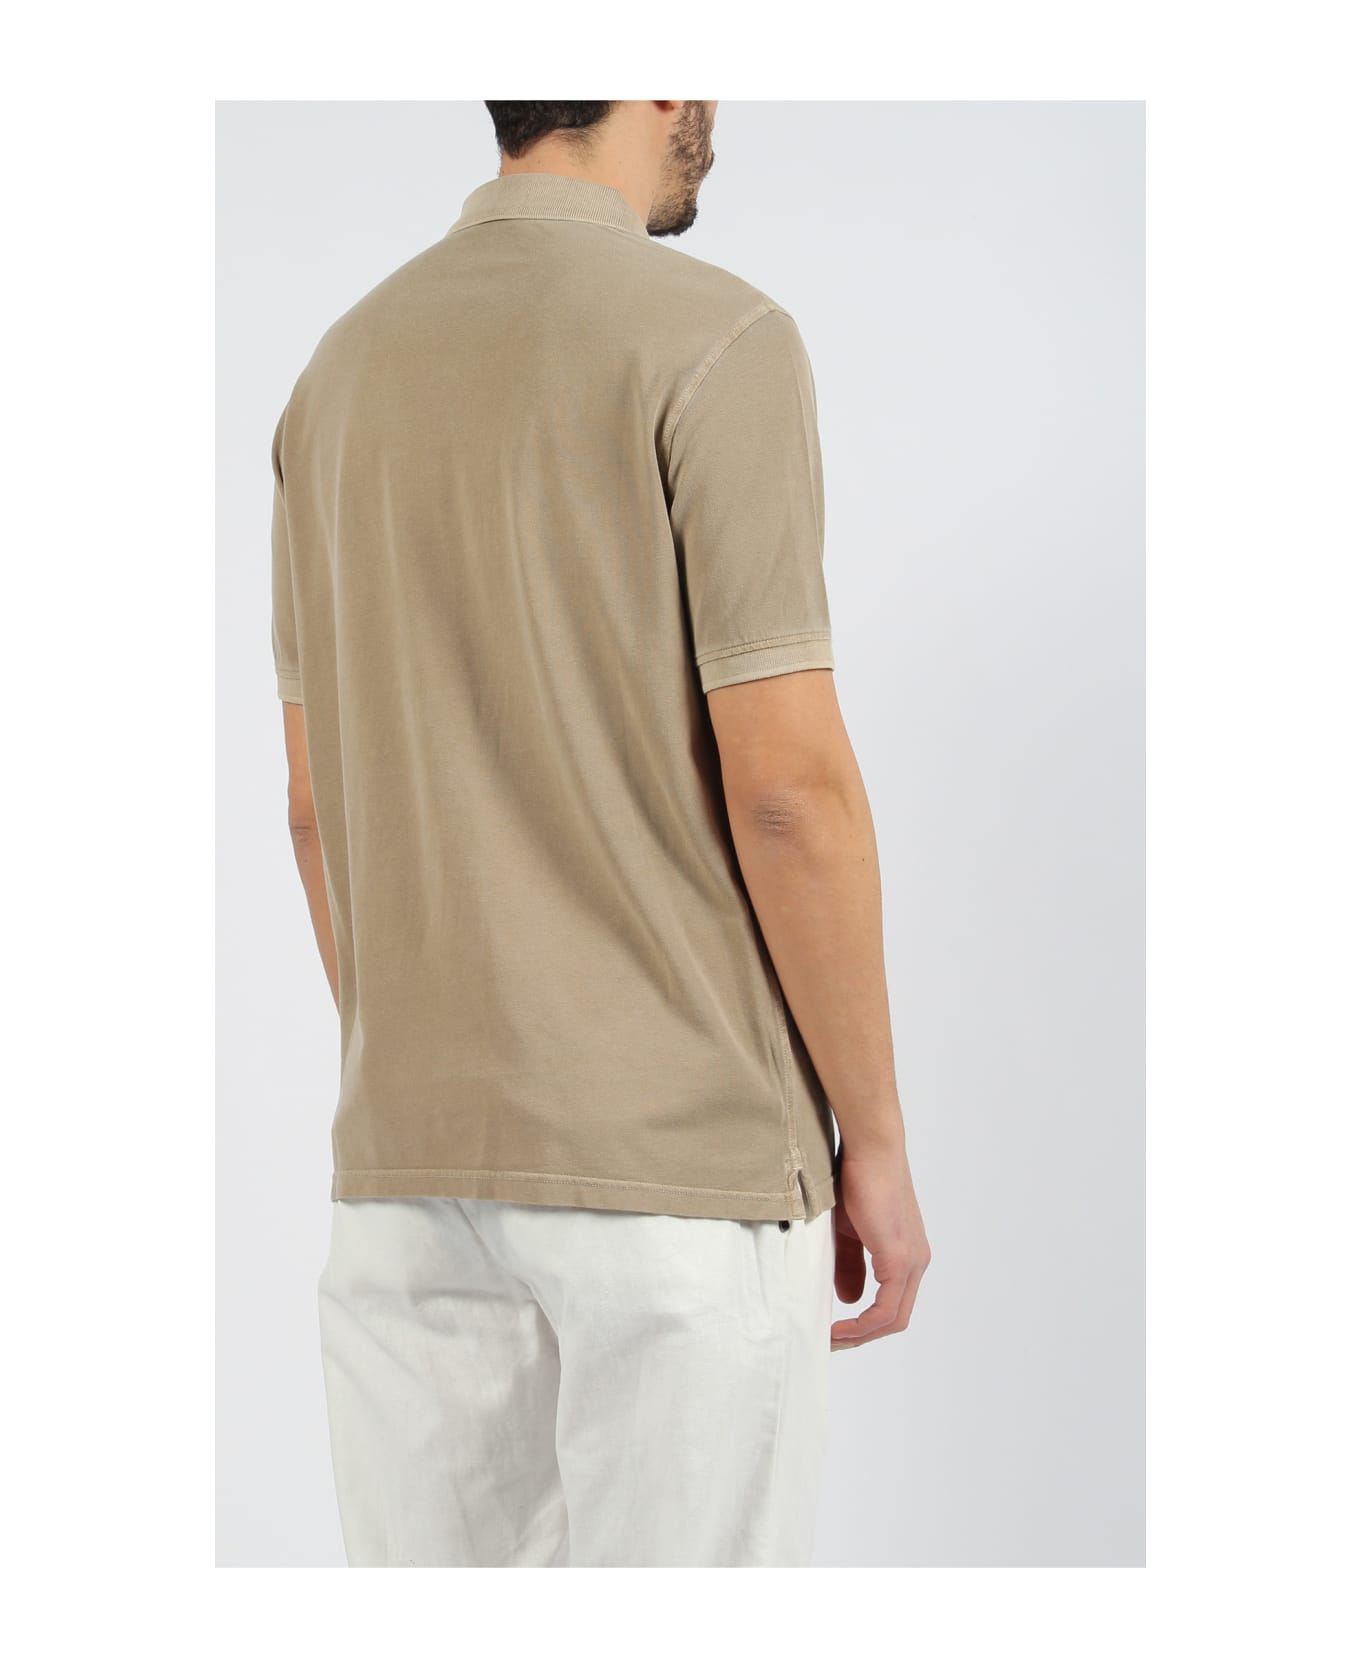 Herno Logo Embroidered Polo Shirt - Light Brown ポロシャツ